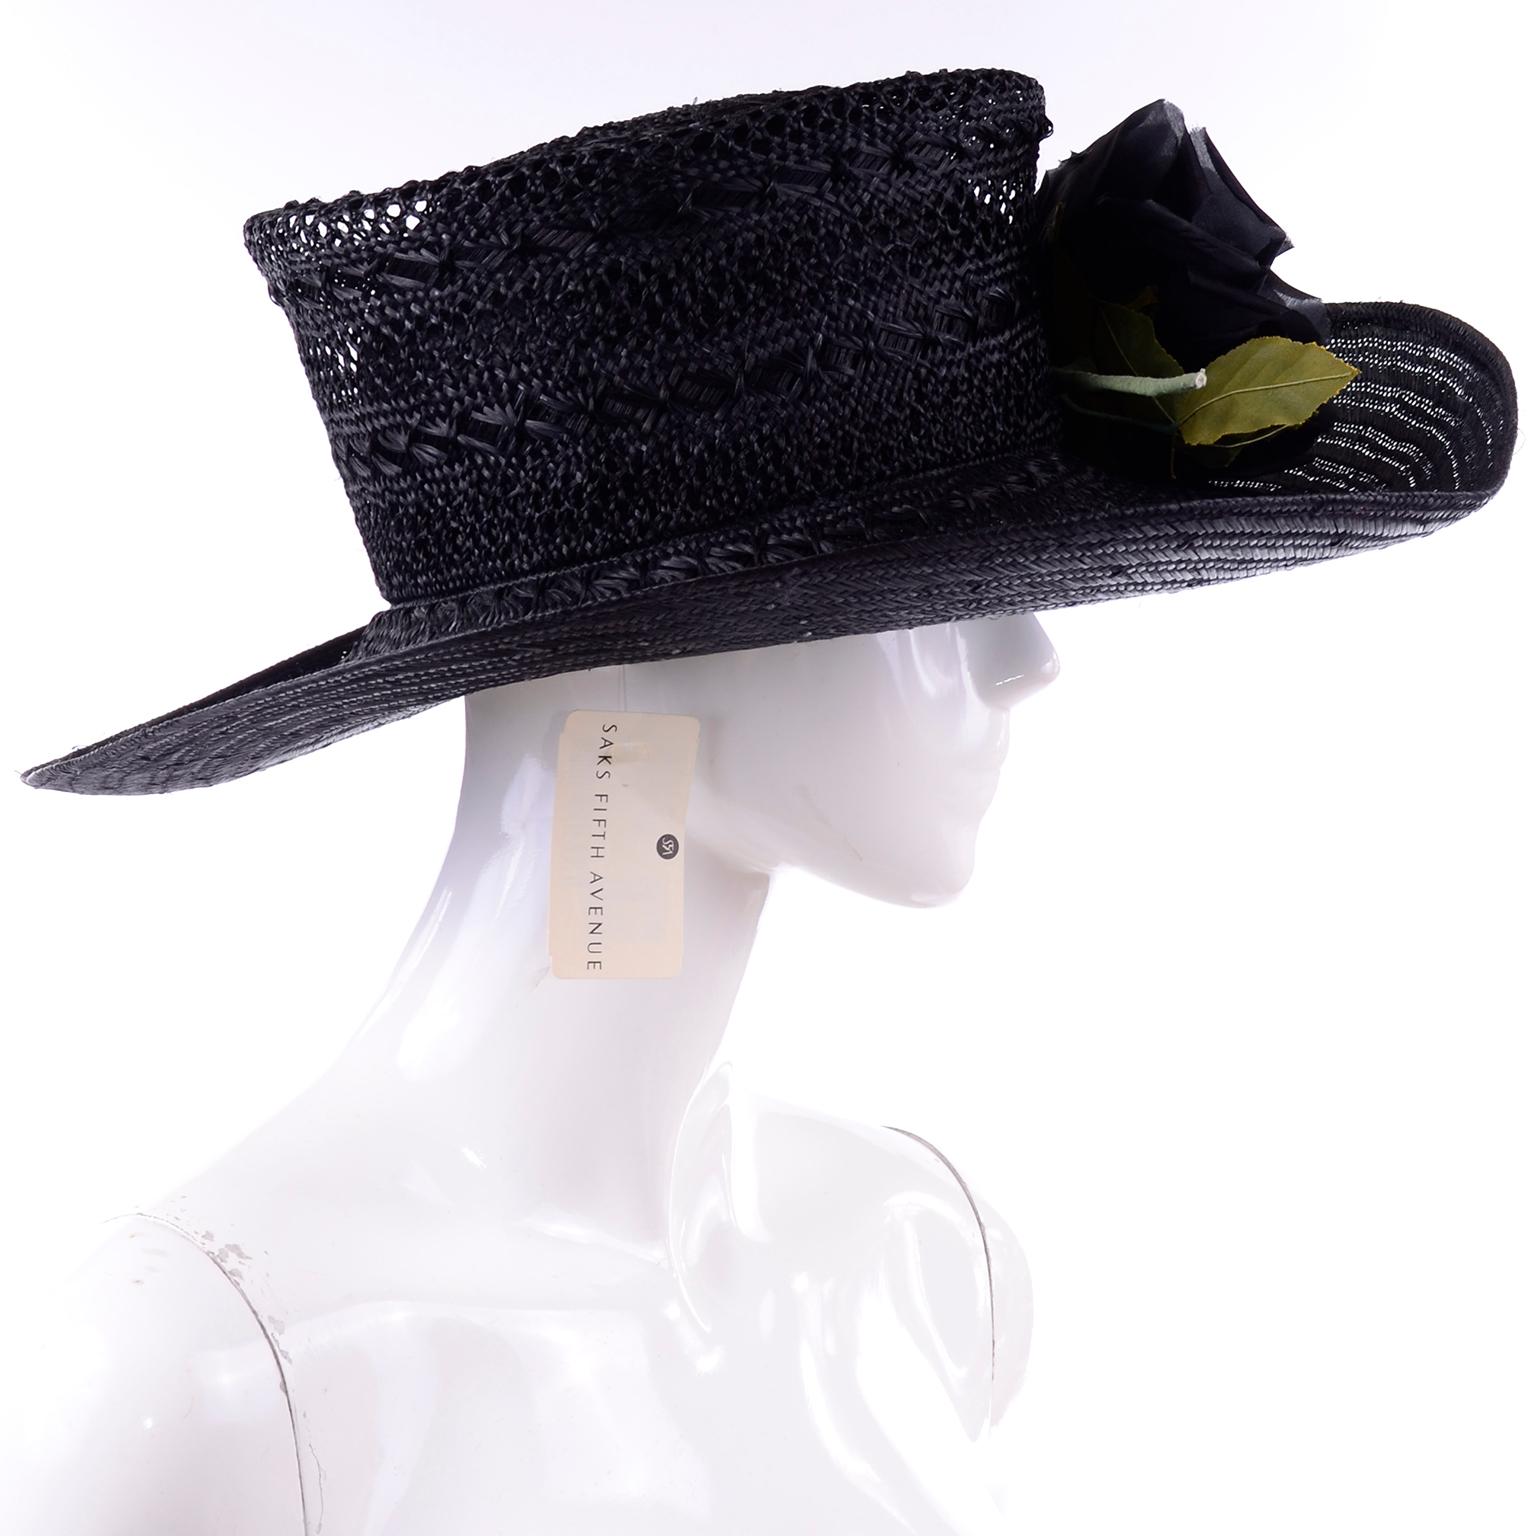 Black straw hat from Saks with the original tag! The top flares out away from the dome piece for a flat circular top. The brim curves up at the edge. 
Head Circumference: 22